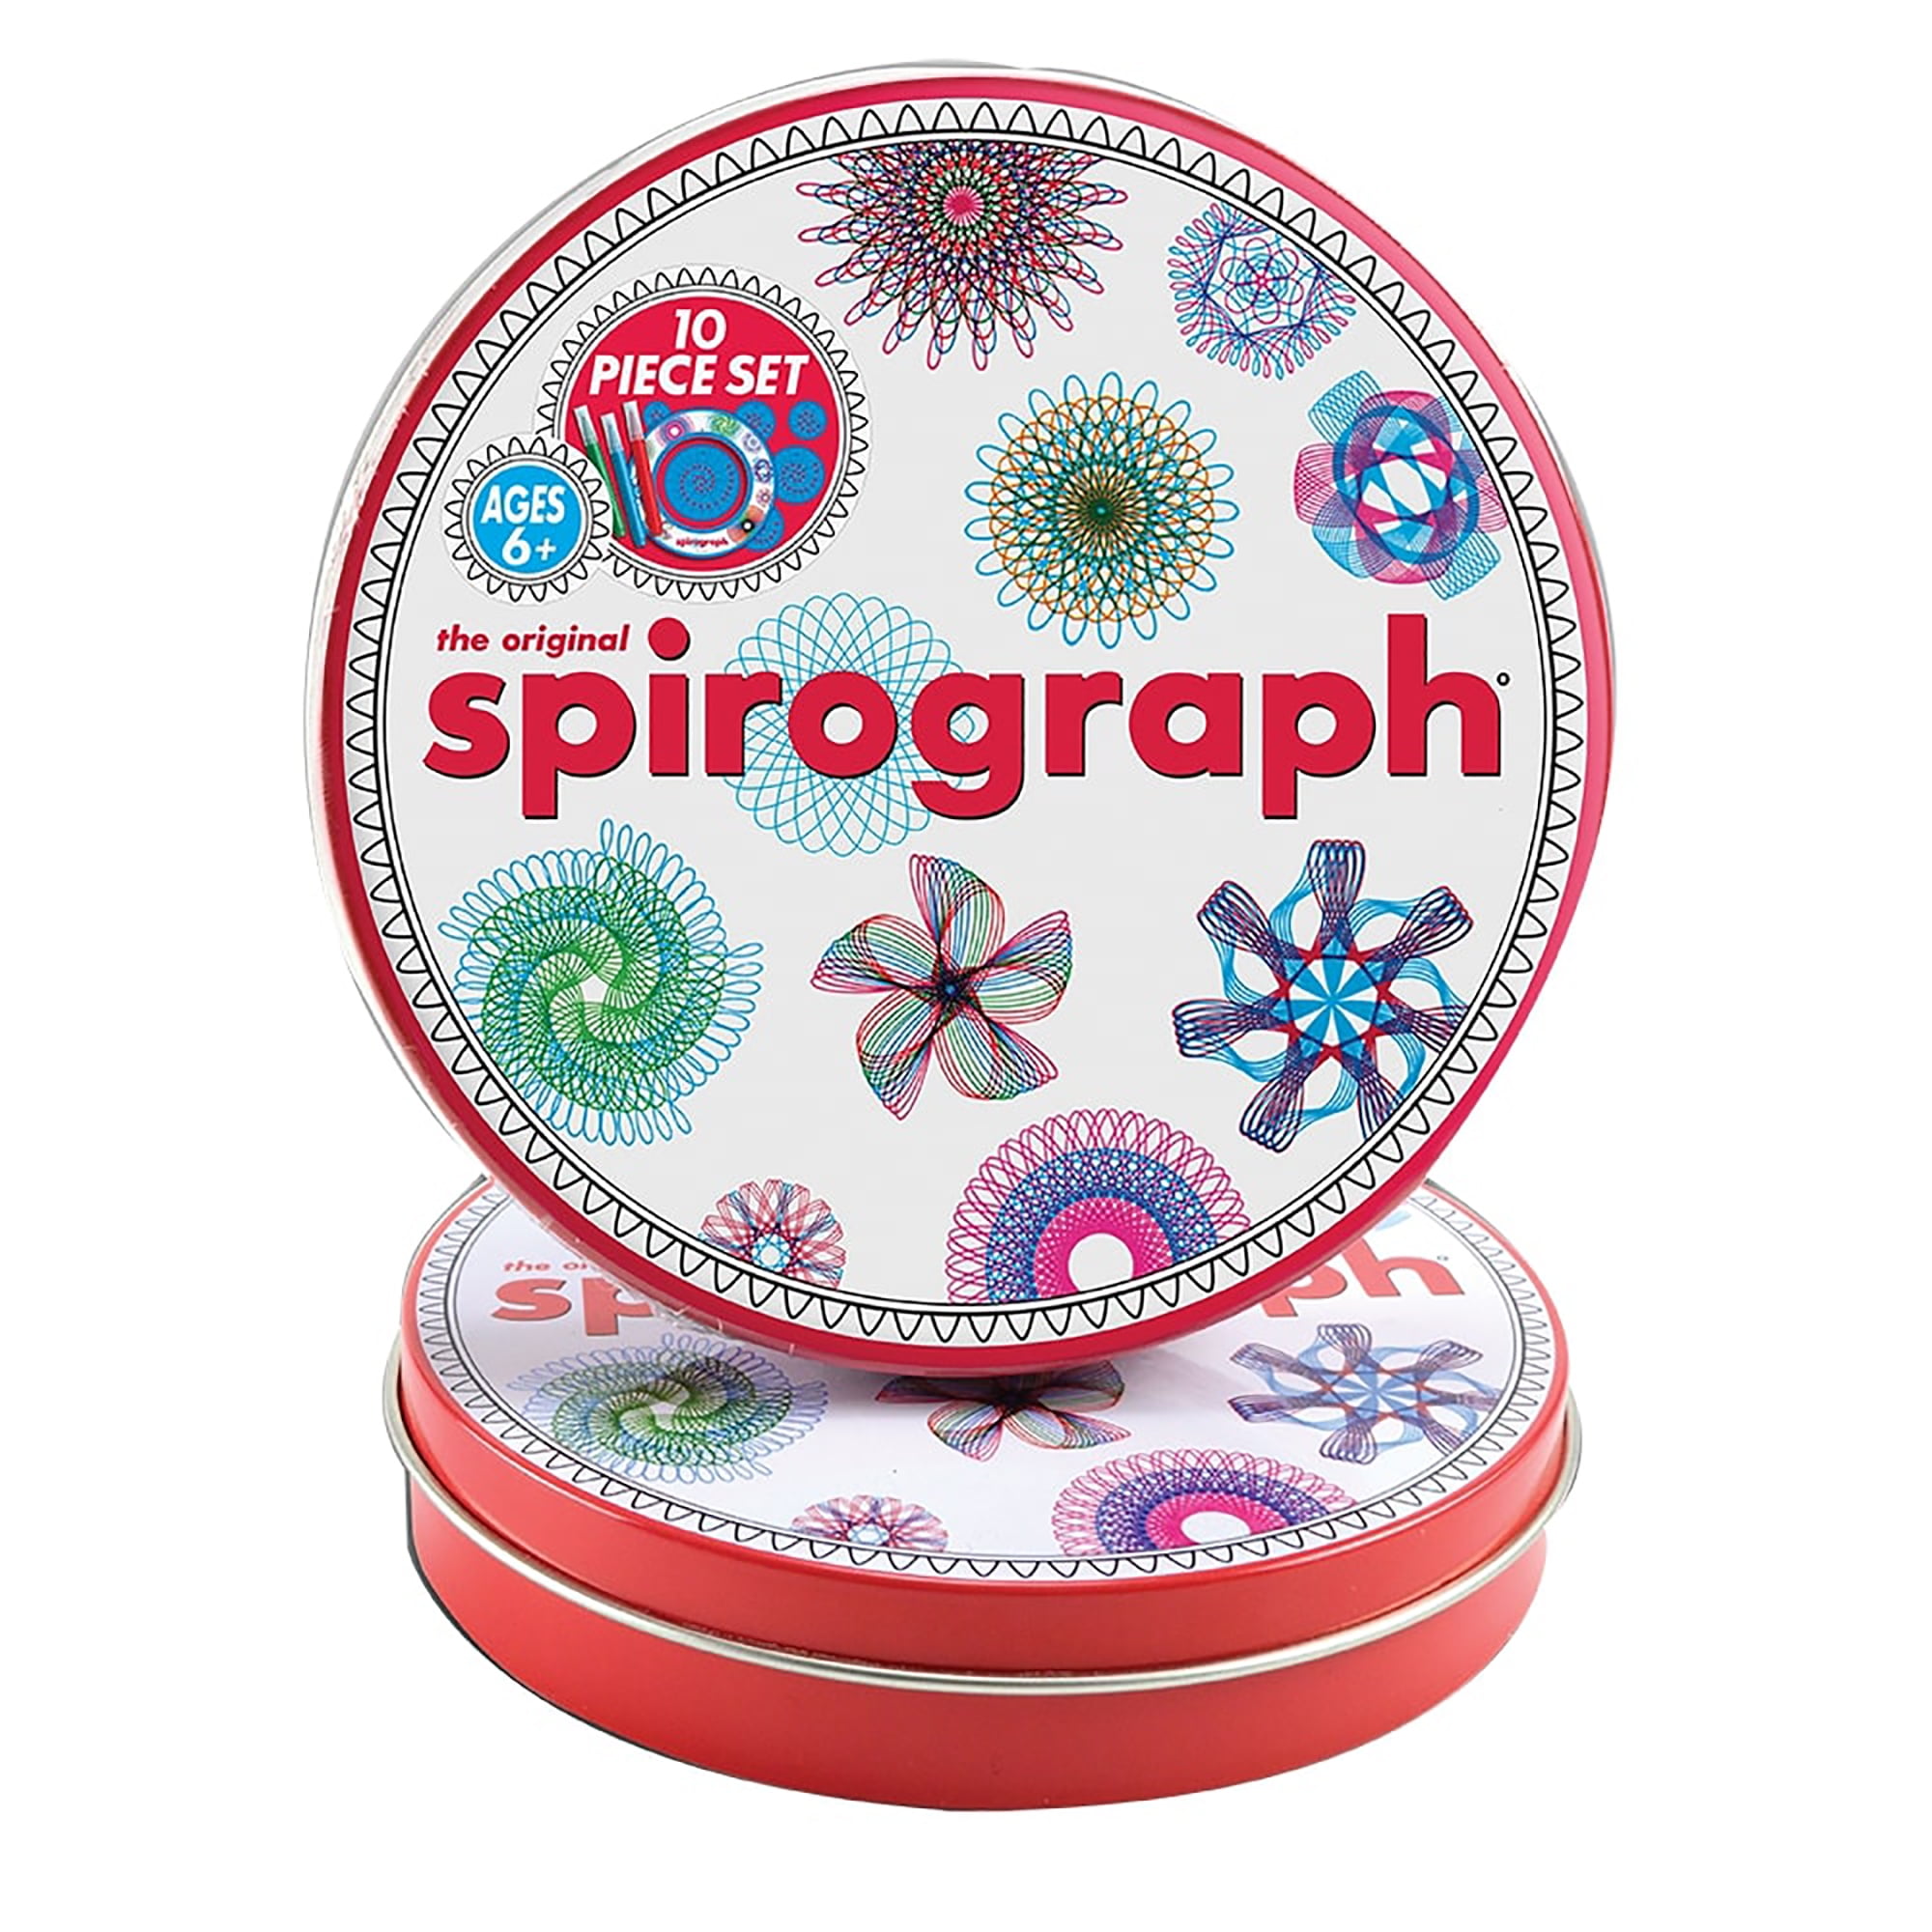 How-To Spirograph: 7-Pointed Designs 